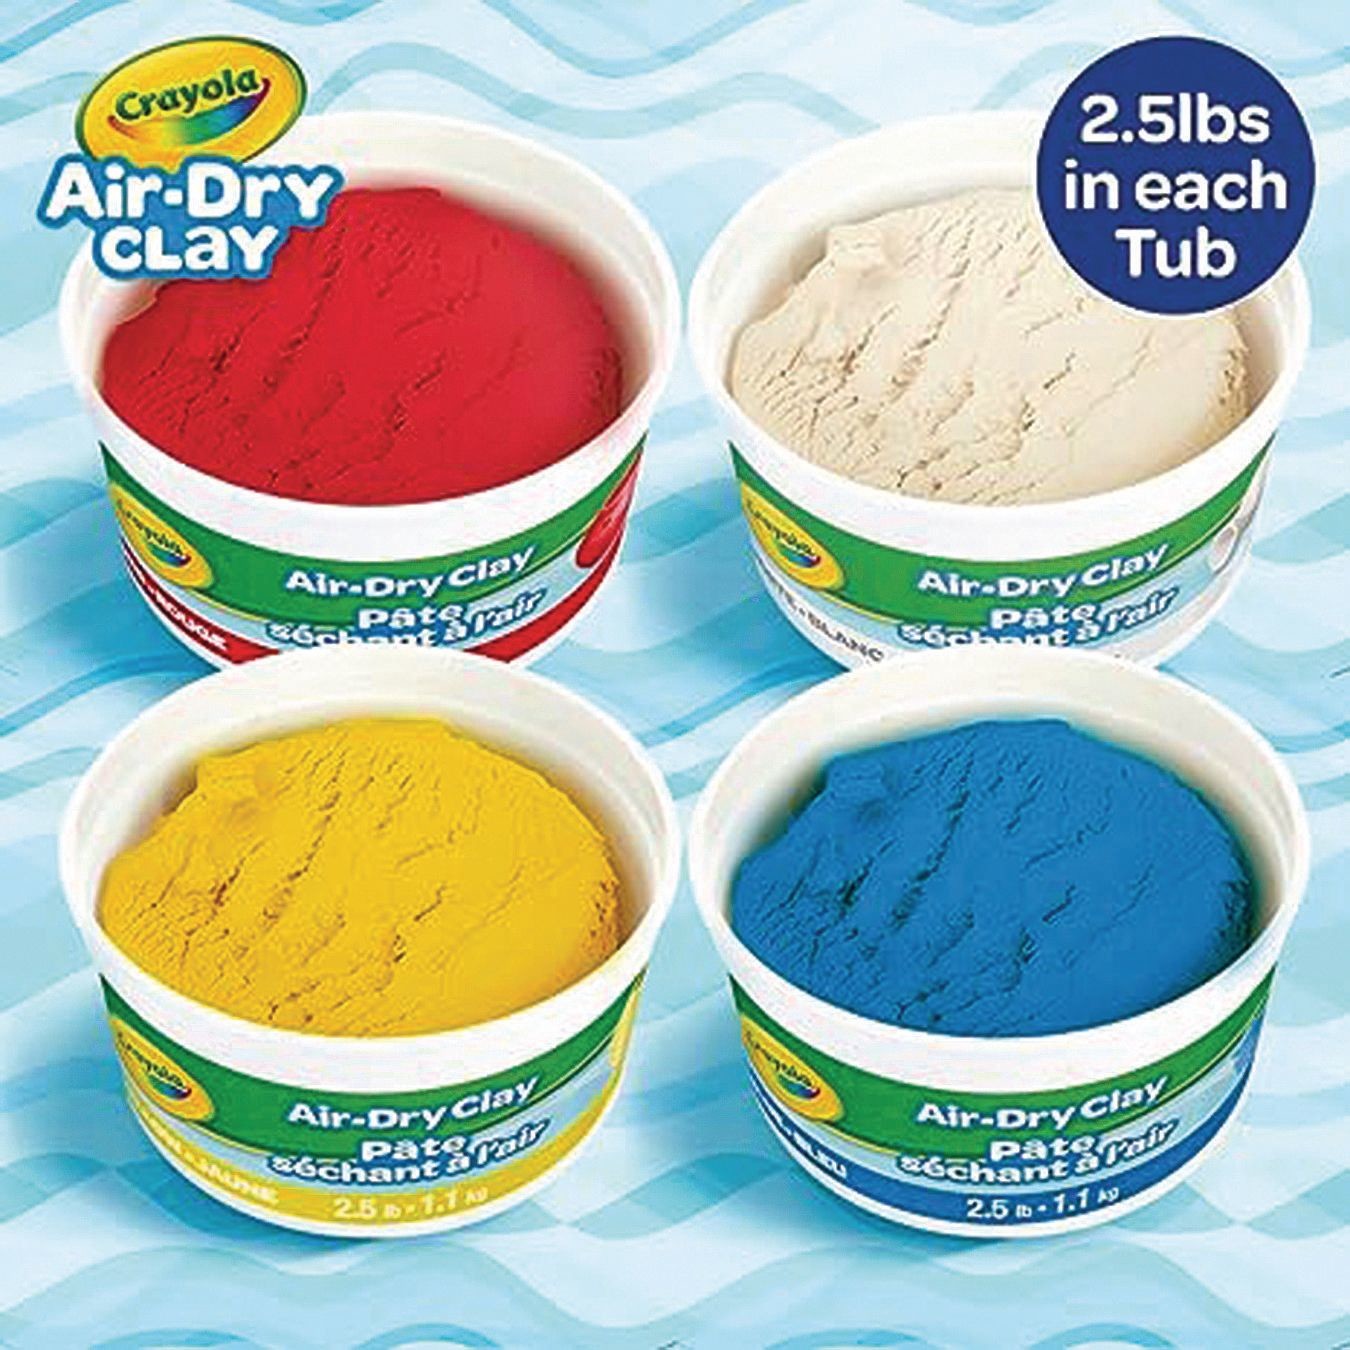 Buy Crayola® Air-Dry Clay Classpack® 2.5 lb Tubs - Classic Colors (Pack of  4) at S&S Worldwide